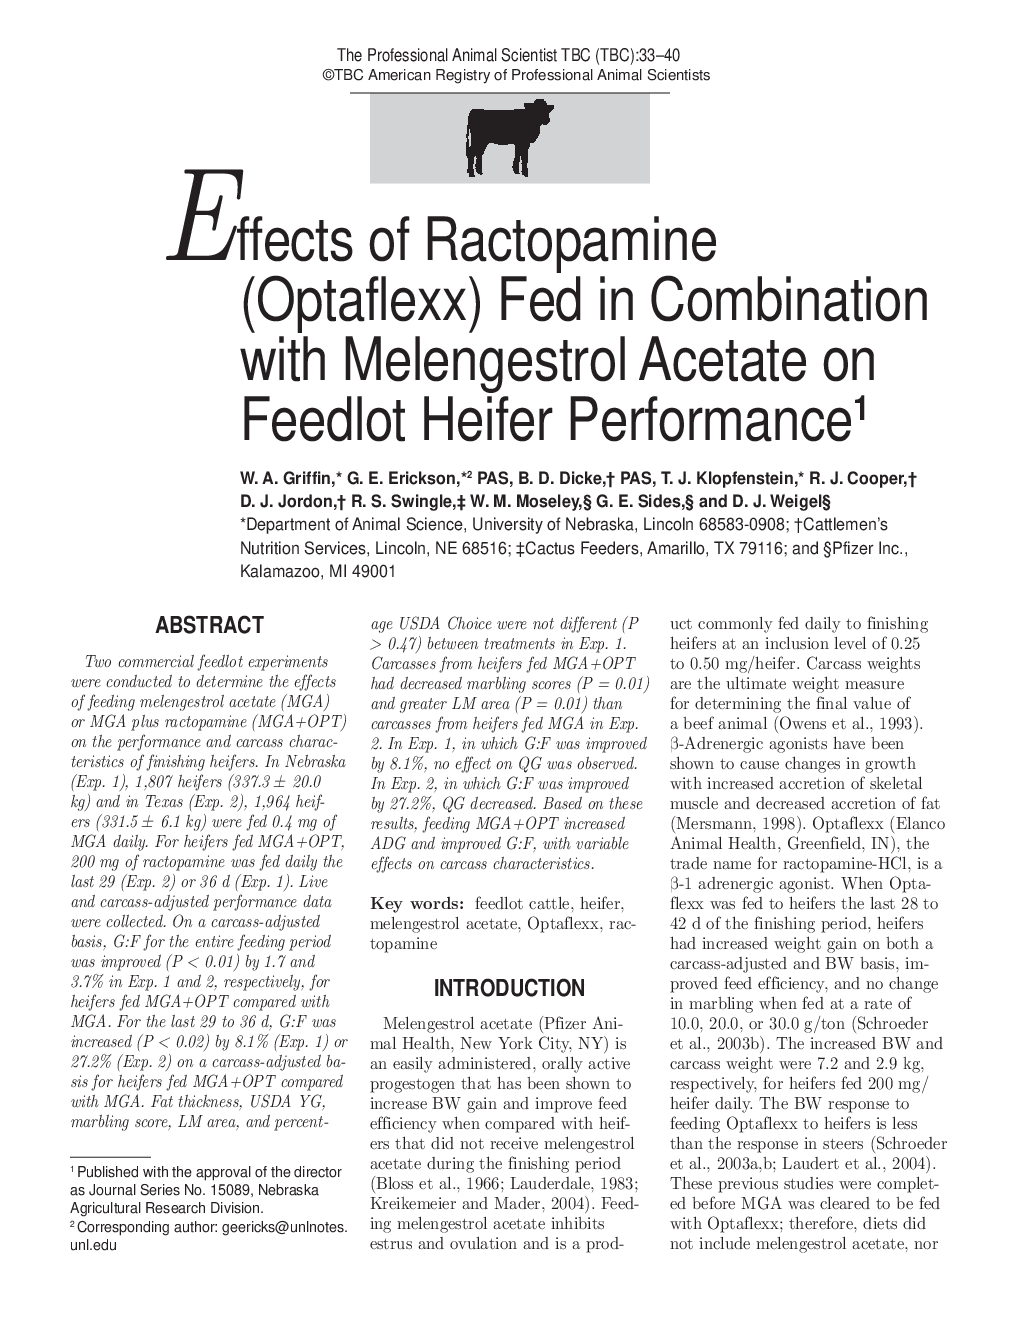 Effects of Ractopamine (Optaflexx) Fed in Combination with Melengestrol Acetate on Feedlot Heifer Performance1